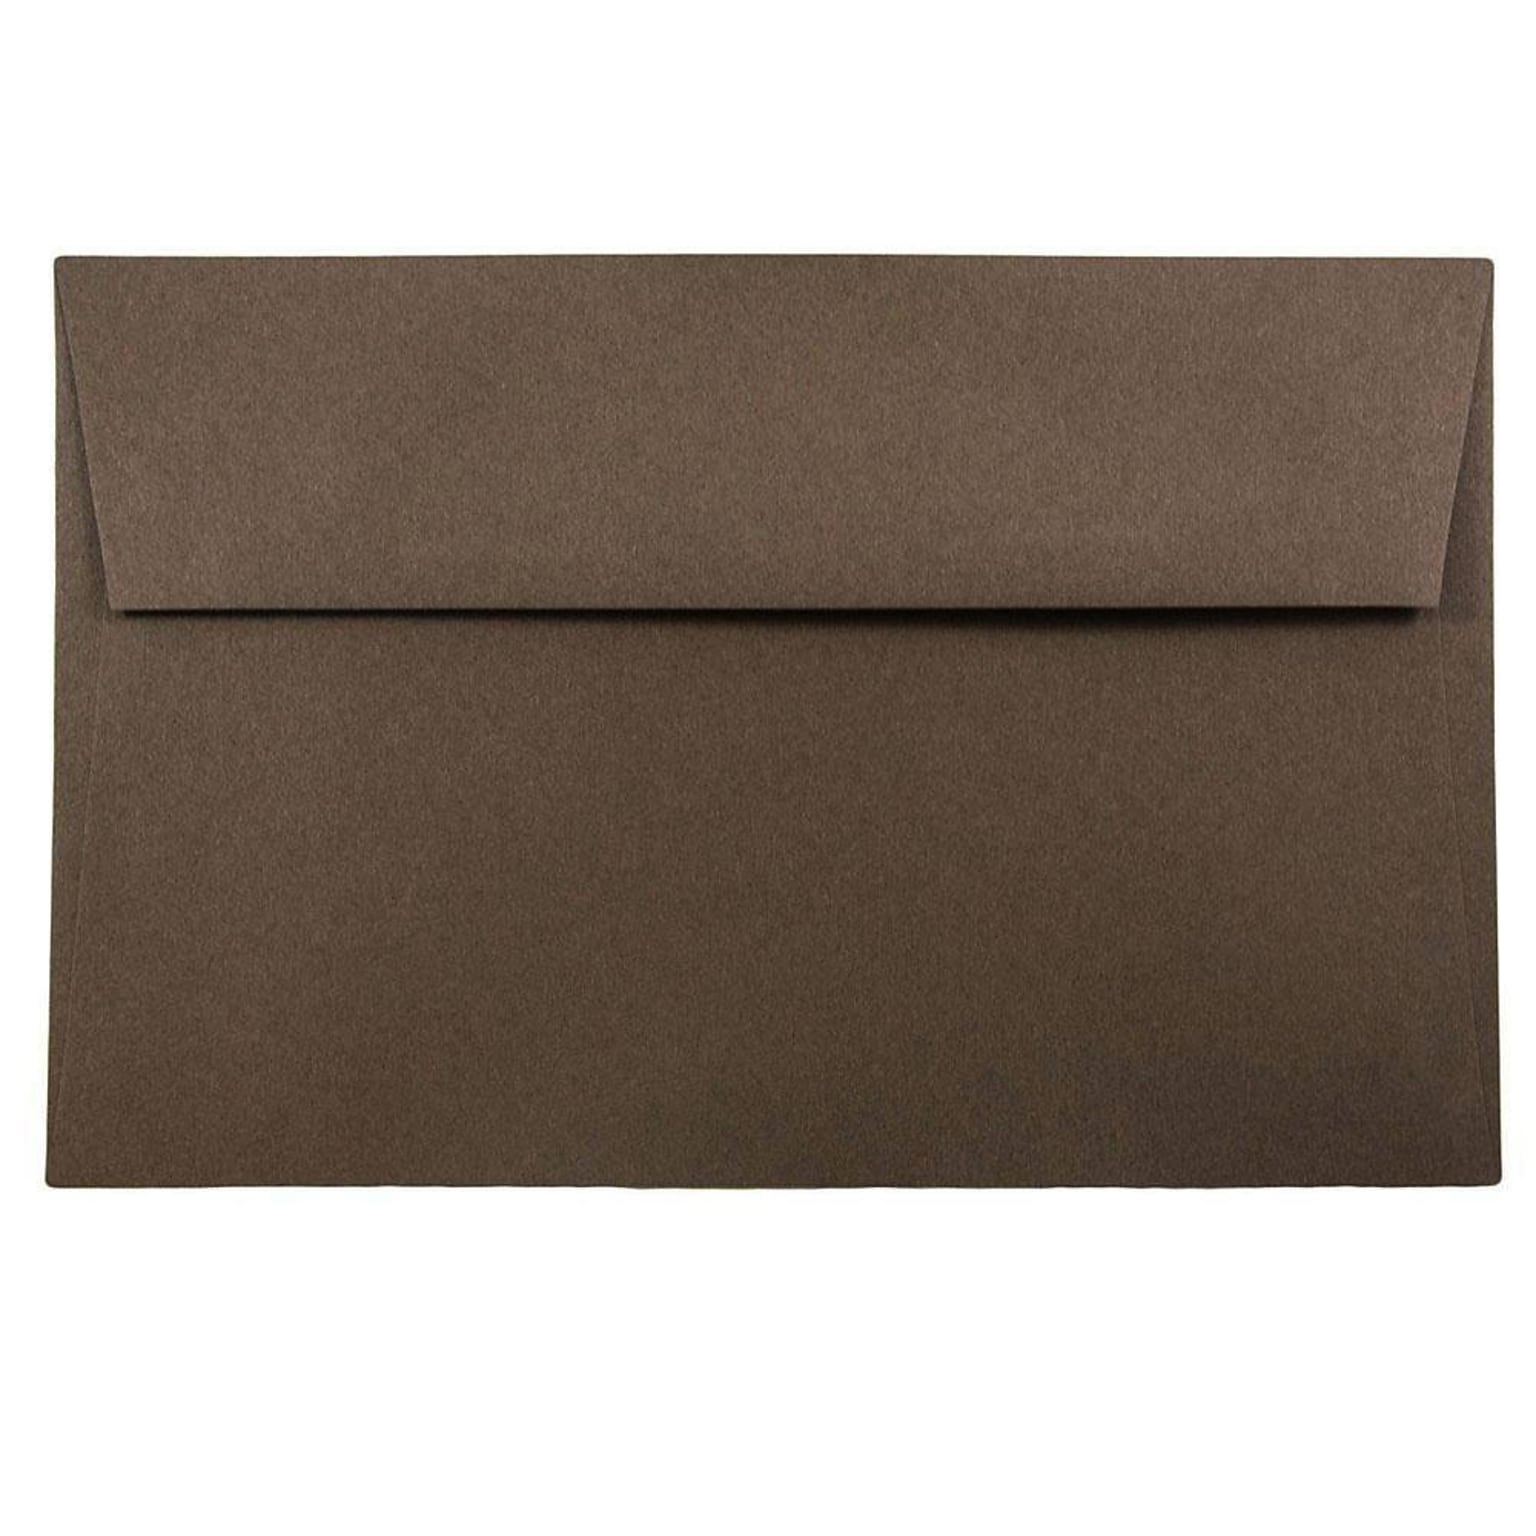 JAM Paper A9 Invitation Envelopes, 5.75 x 8.75, Chocolate Brown Recycled, 50/Pack (32311328I)